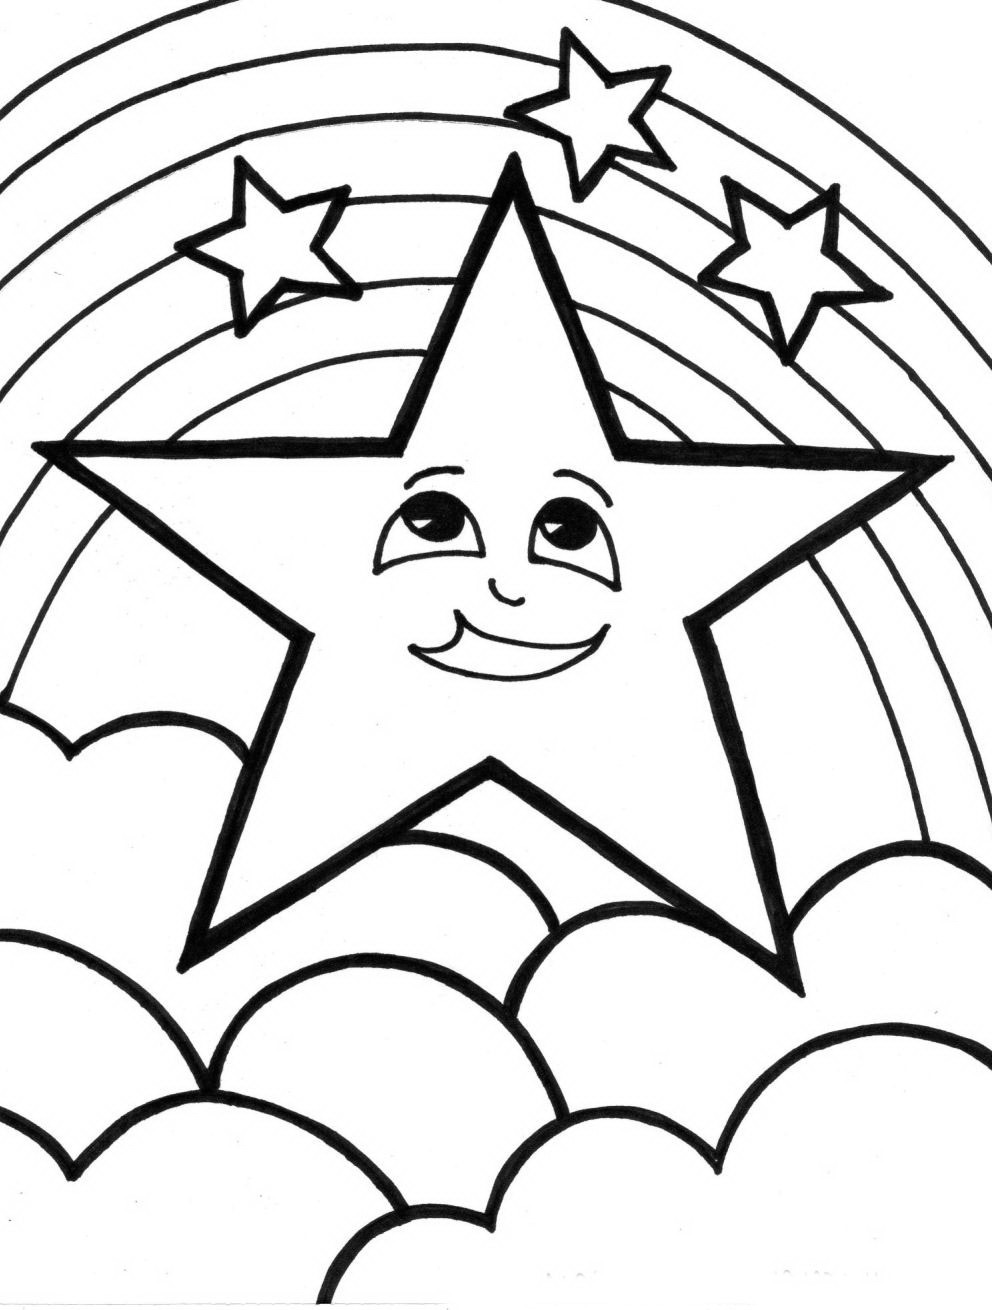 Printable Rainbow Coloring Sheet
 Rainbow Coloring Pages for childrens printable for free